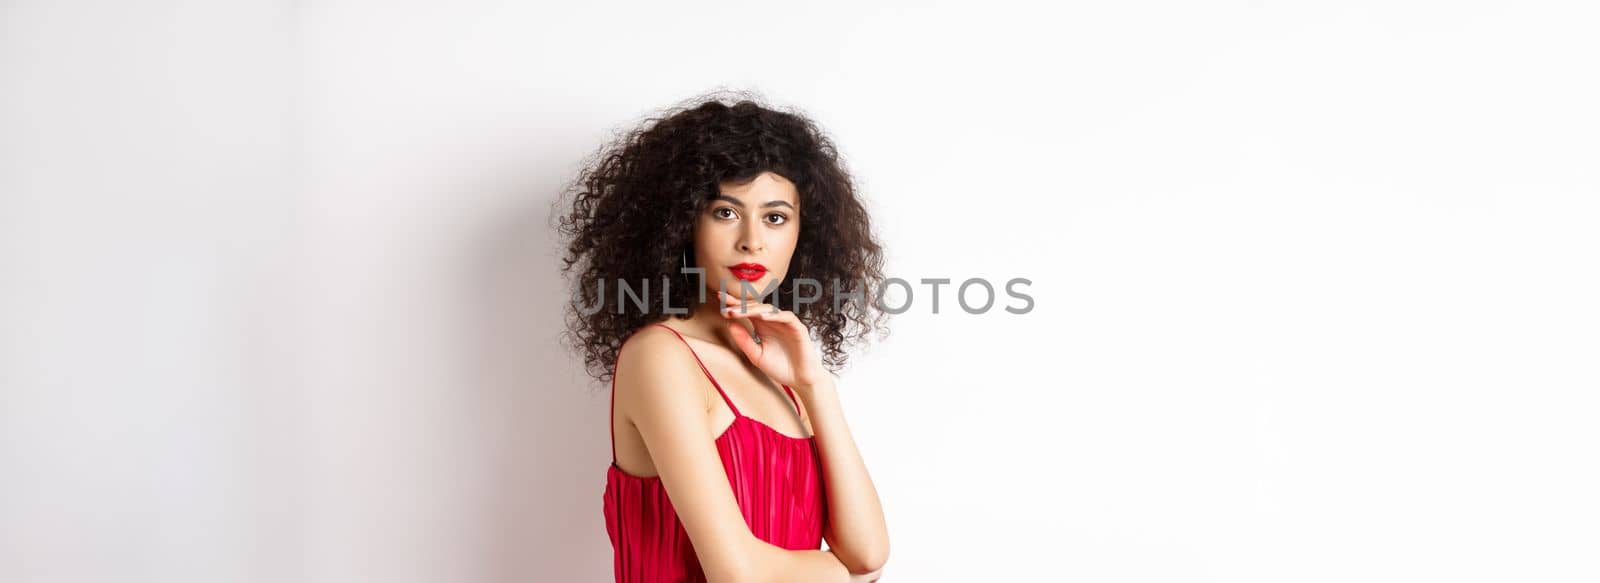 Beauty and fashion. Elegant lady with curly hair and red lips, fashionable makeup, wearing dress, gently touching chin and looking sensual at camera, white background.